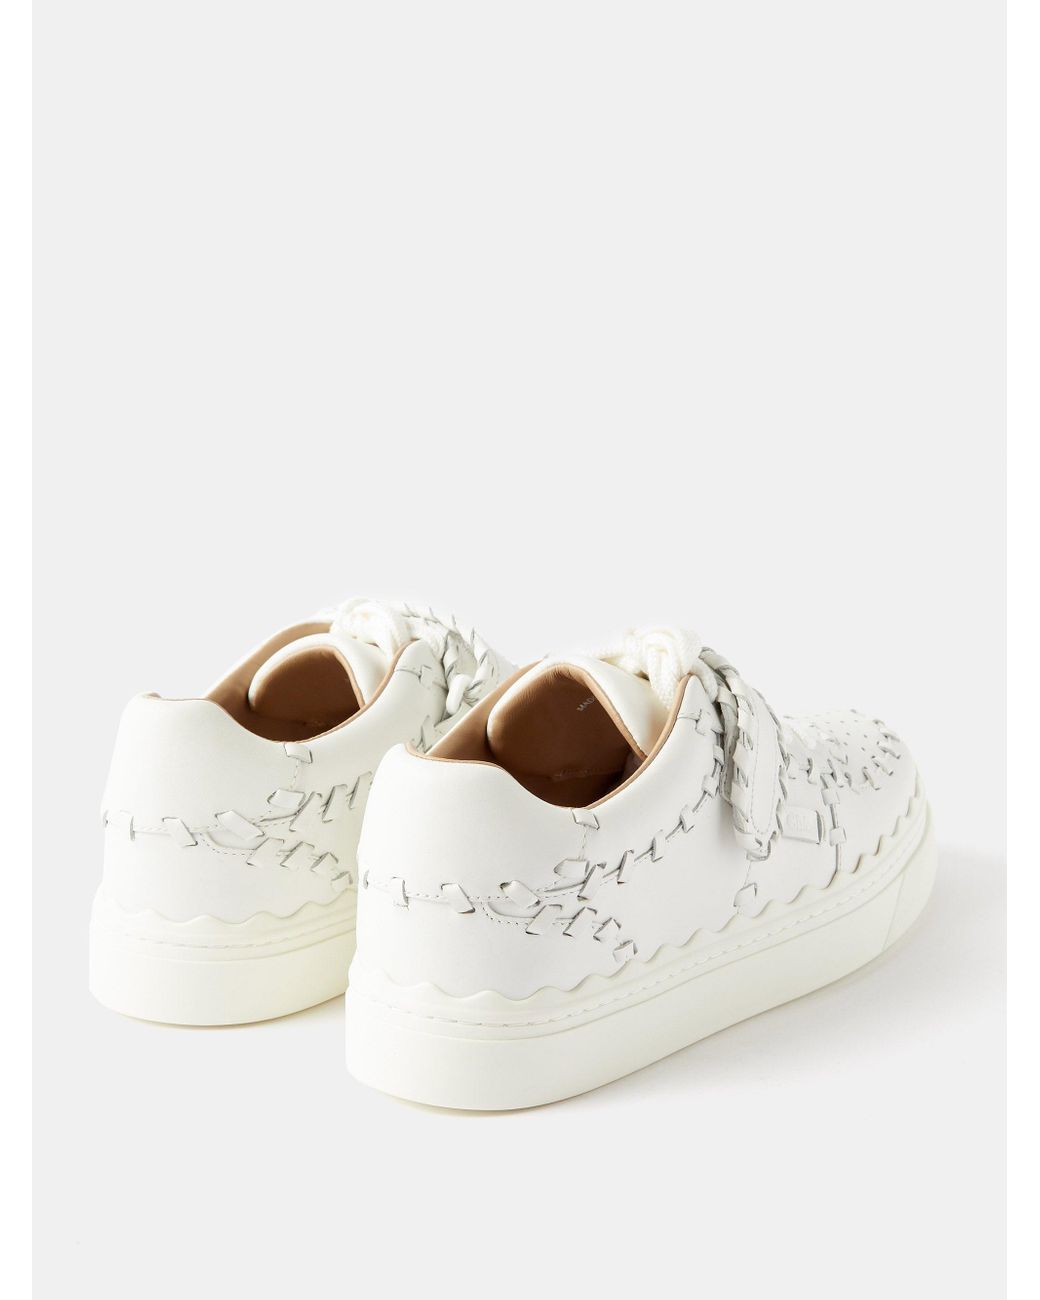 Chloé Lauren Whipstitched Leather Trainers in White | Lyst